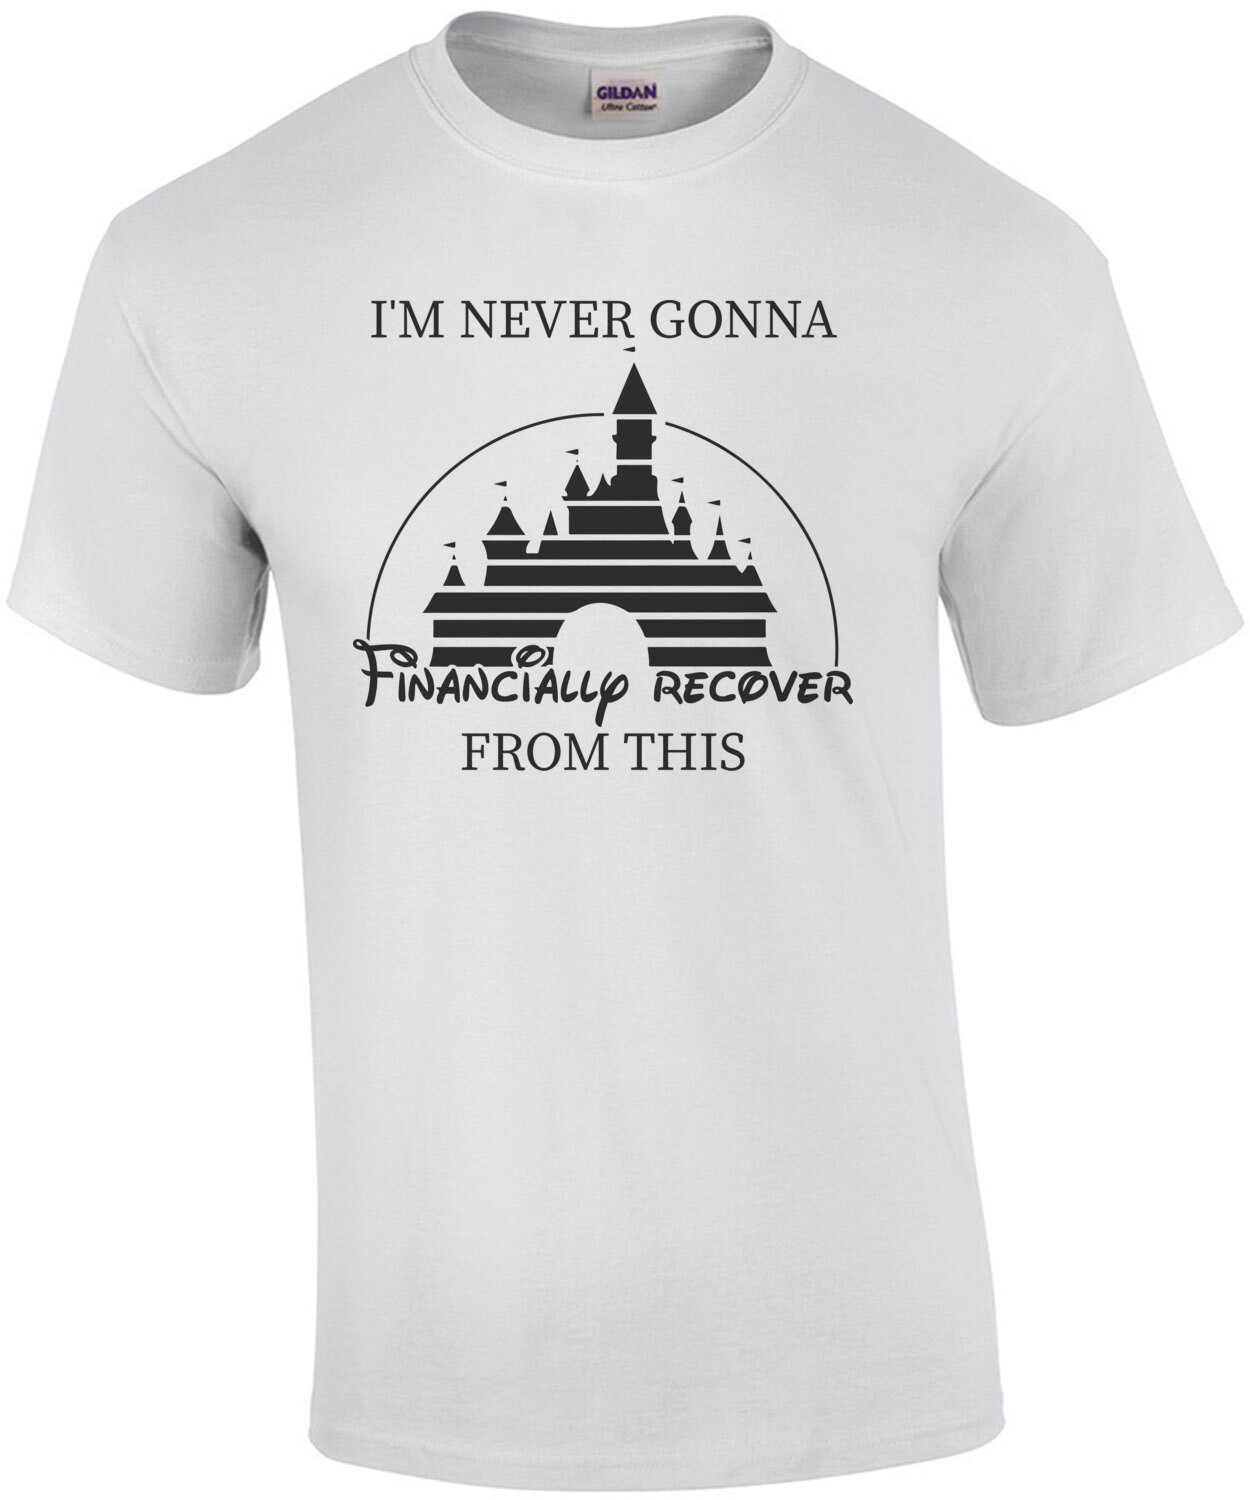 I'm Never Gonna Financially Recover From This. Funny Sarcastic Disney World Disney Land Parody T-Shirt